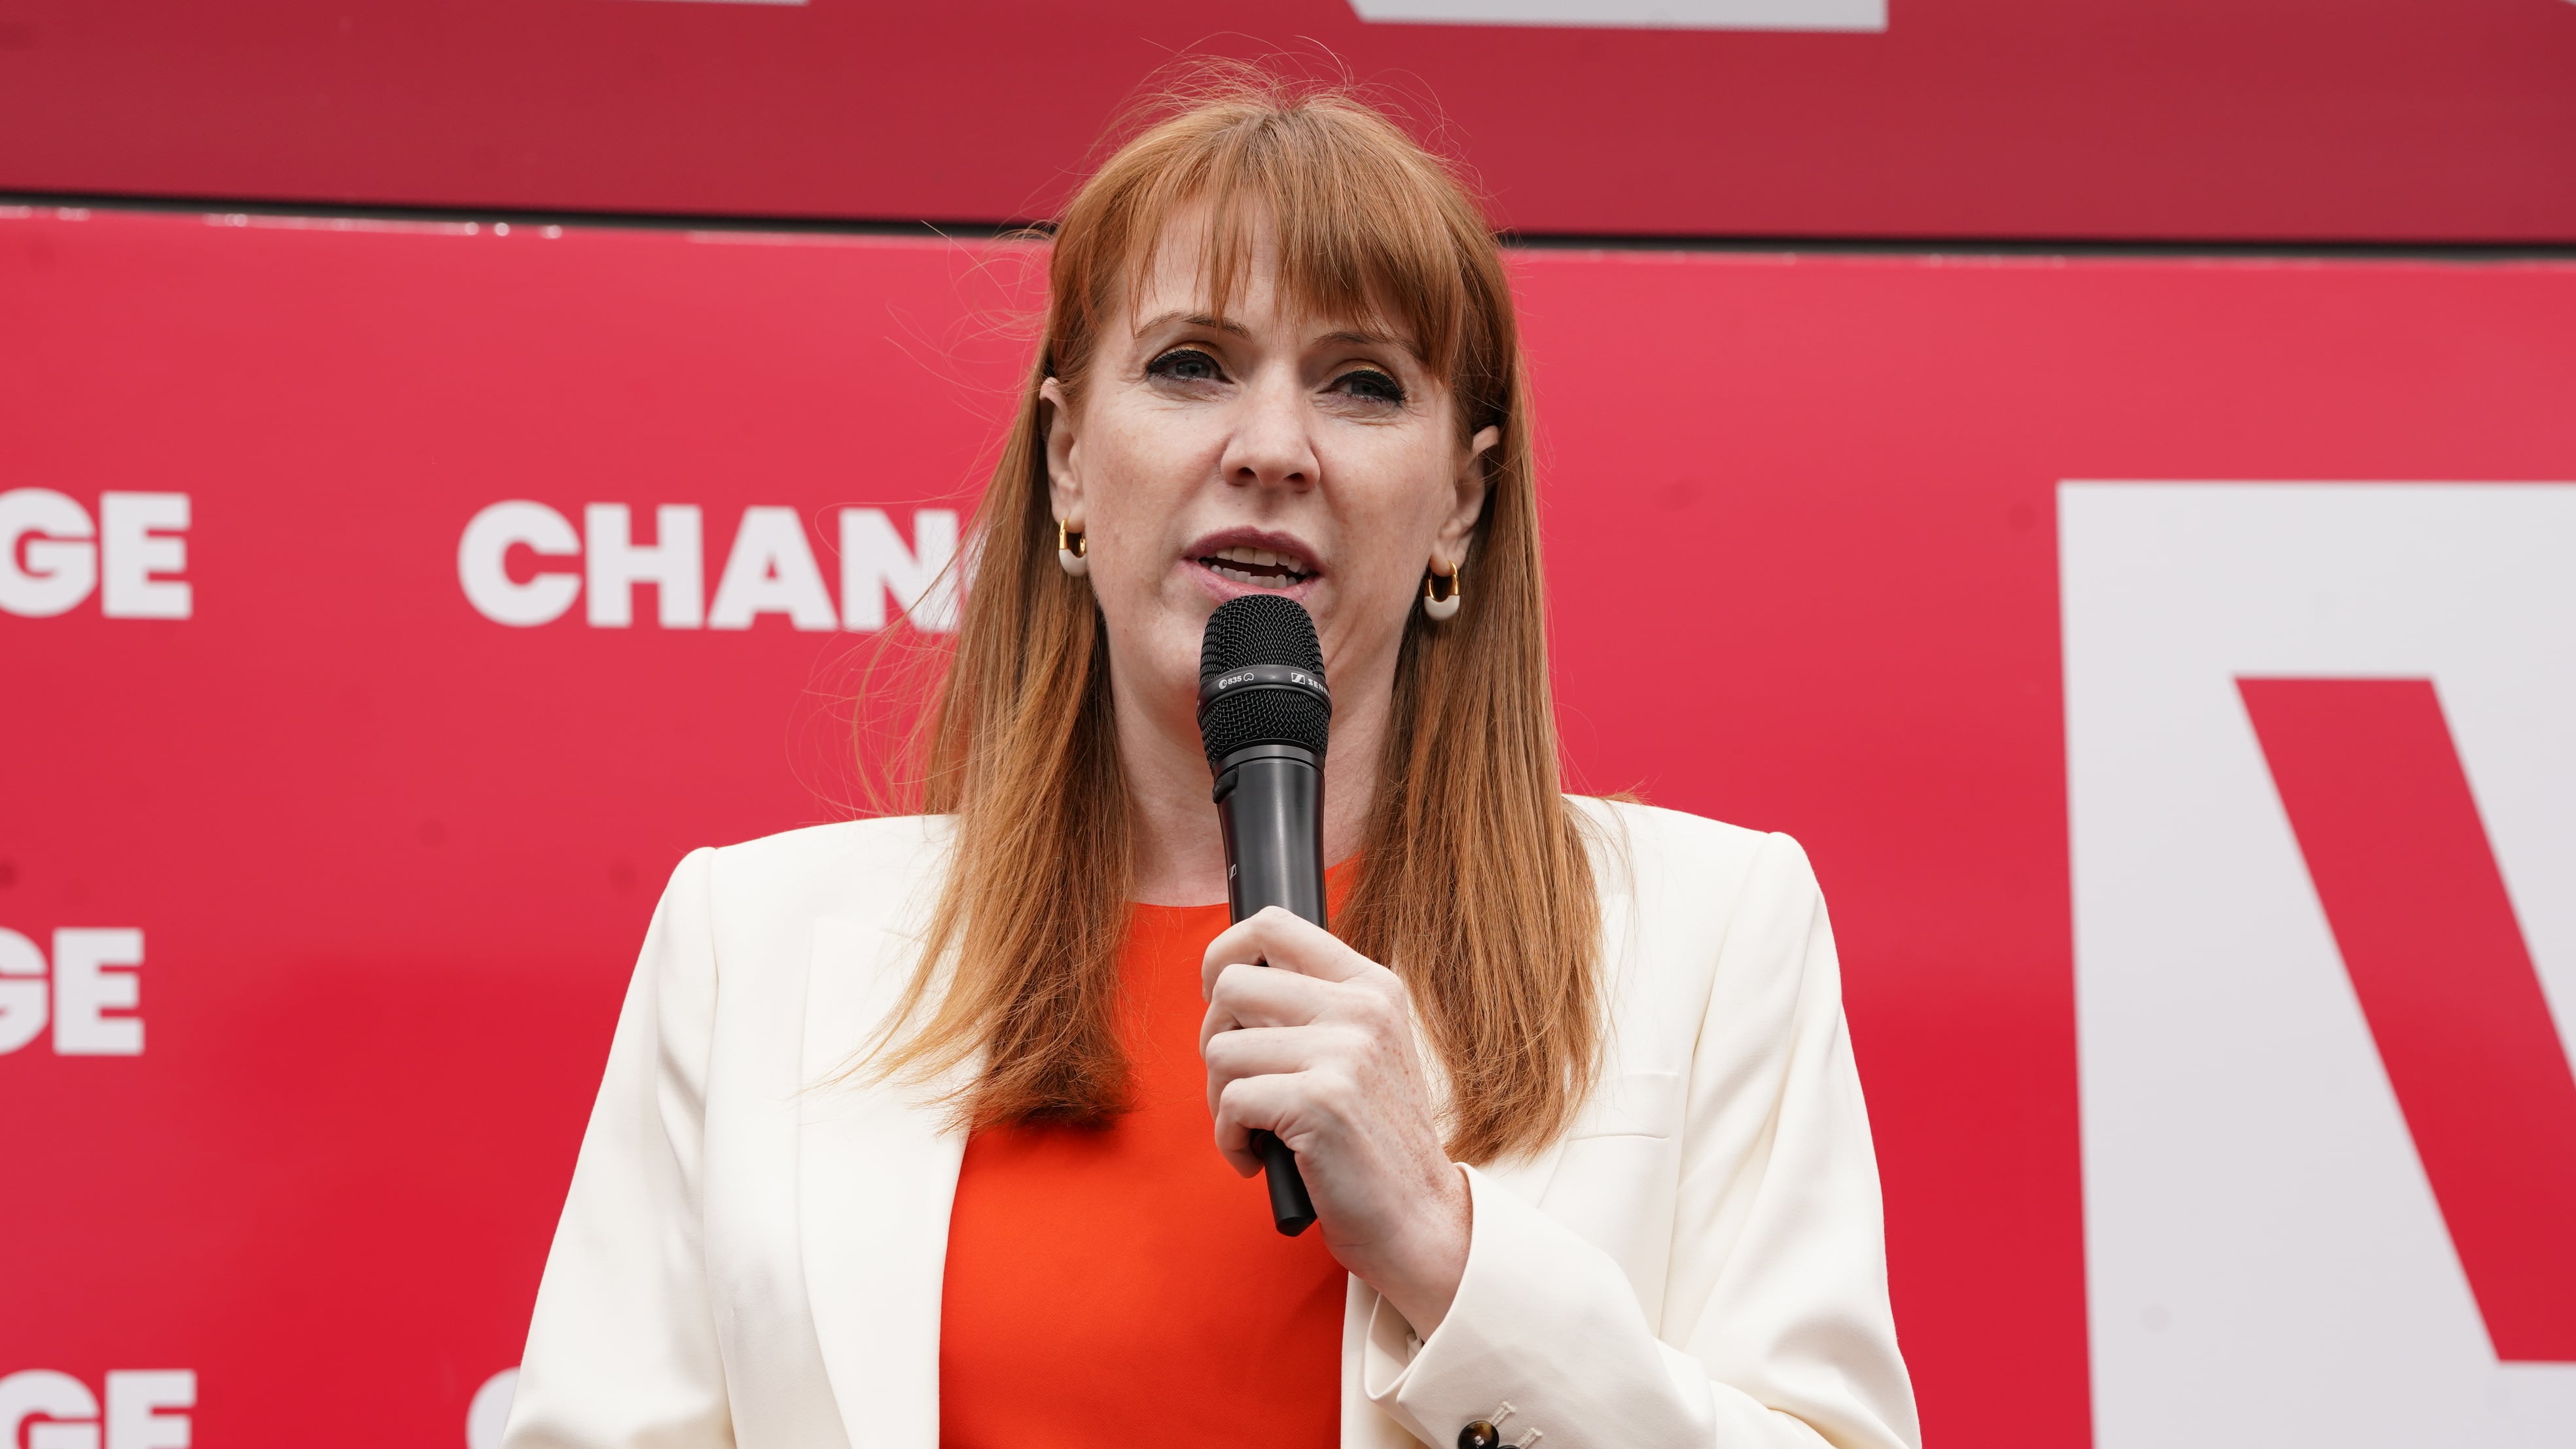 Deputy Labour leader Angela Rayner at the launch of Labour’s campaign bus in Uxbridge